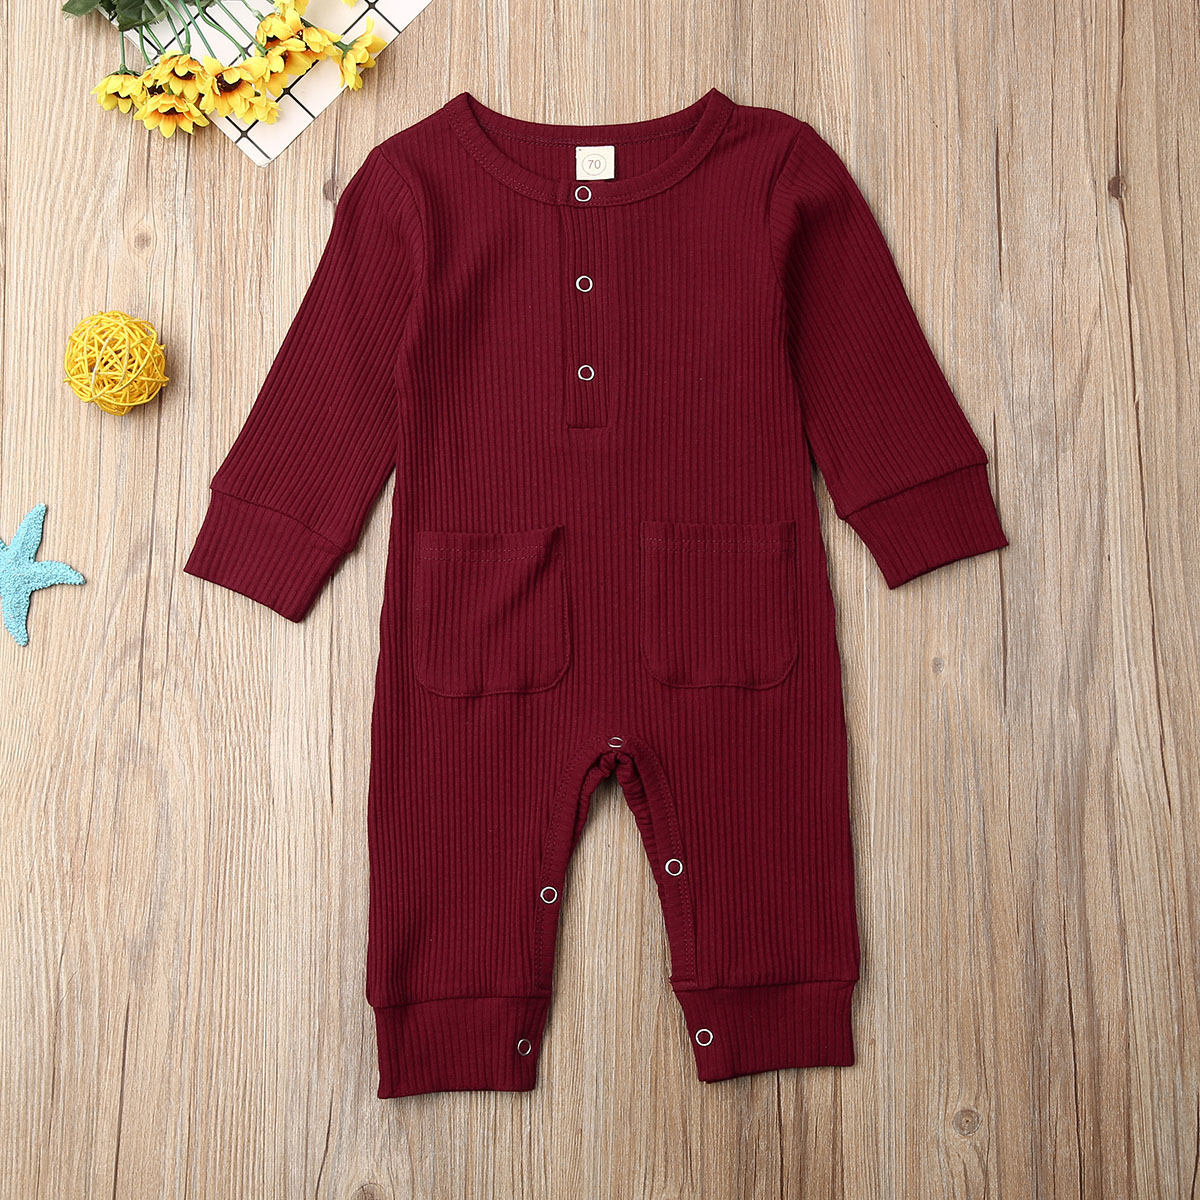 Baby Romper Infant Baby Boy Girl 0-18M Knitted Long Sleeve Solid Romper Jumpsuit Winter Clothes Outfits